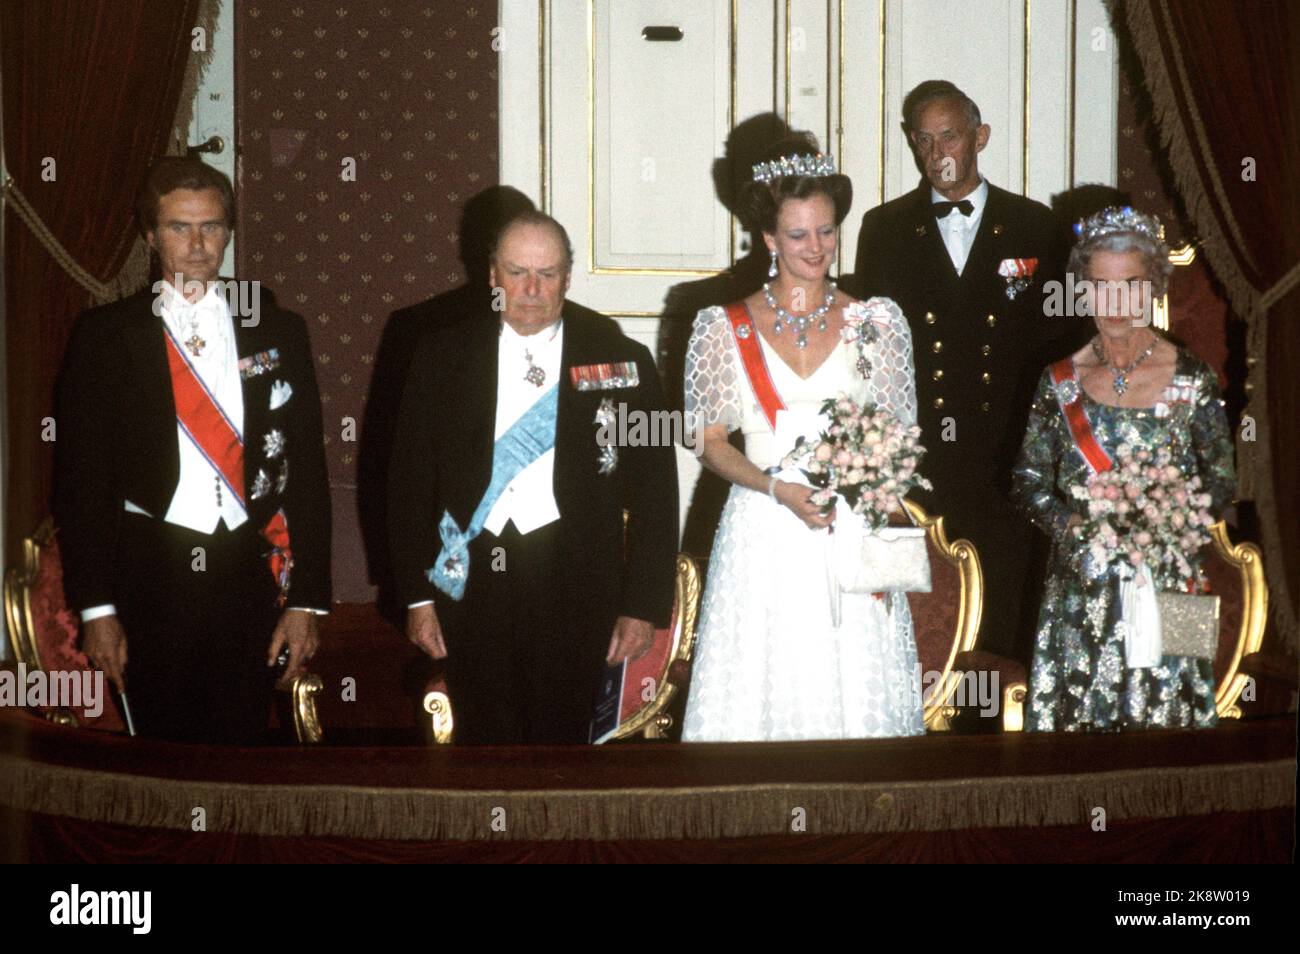 Copenhagen, September 1974: King Olav on an official visit to Denmark. Here visits to the Royal Theater (f.) Prince Henrik, King Olav, Queen Margrethe and the queen mother Ingrid. Photo: Erik Thorberg NTB / NTB Stock Photo